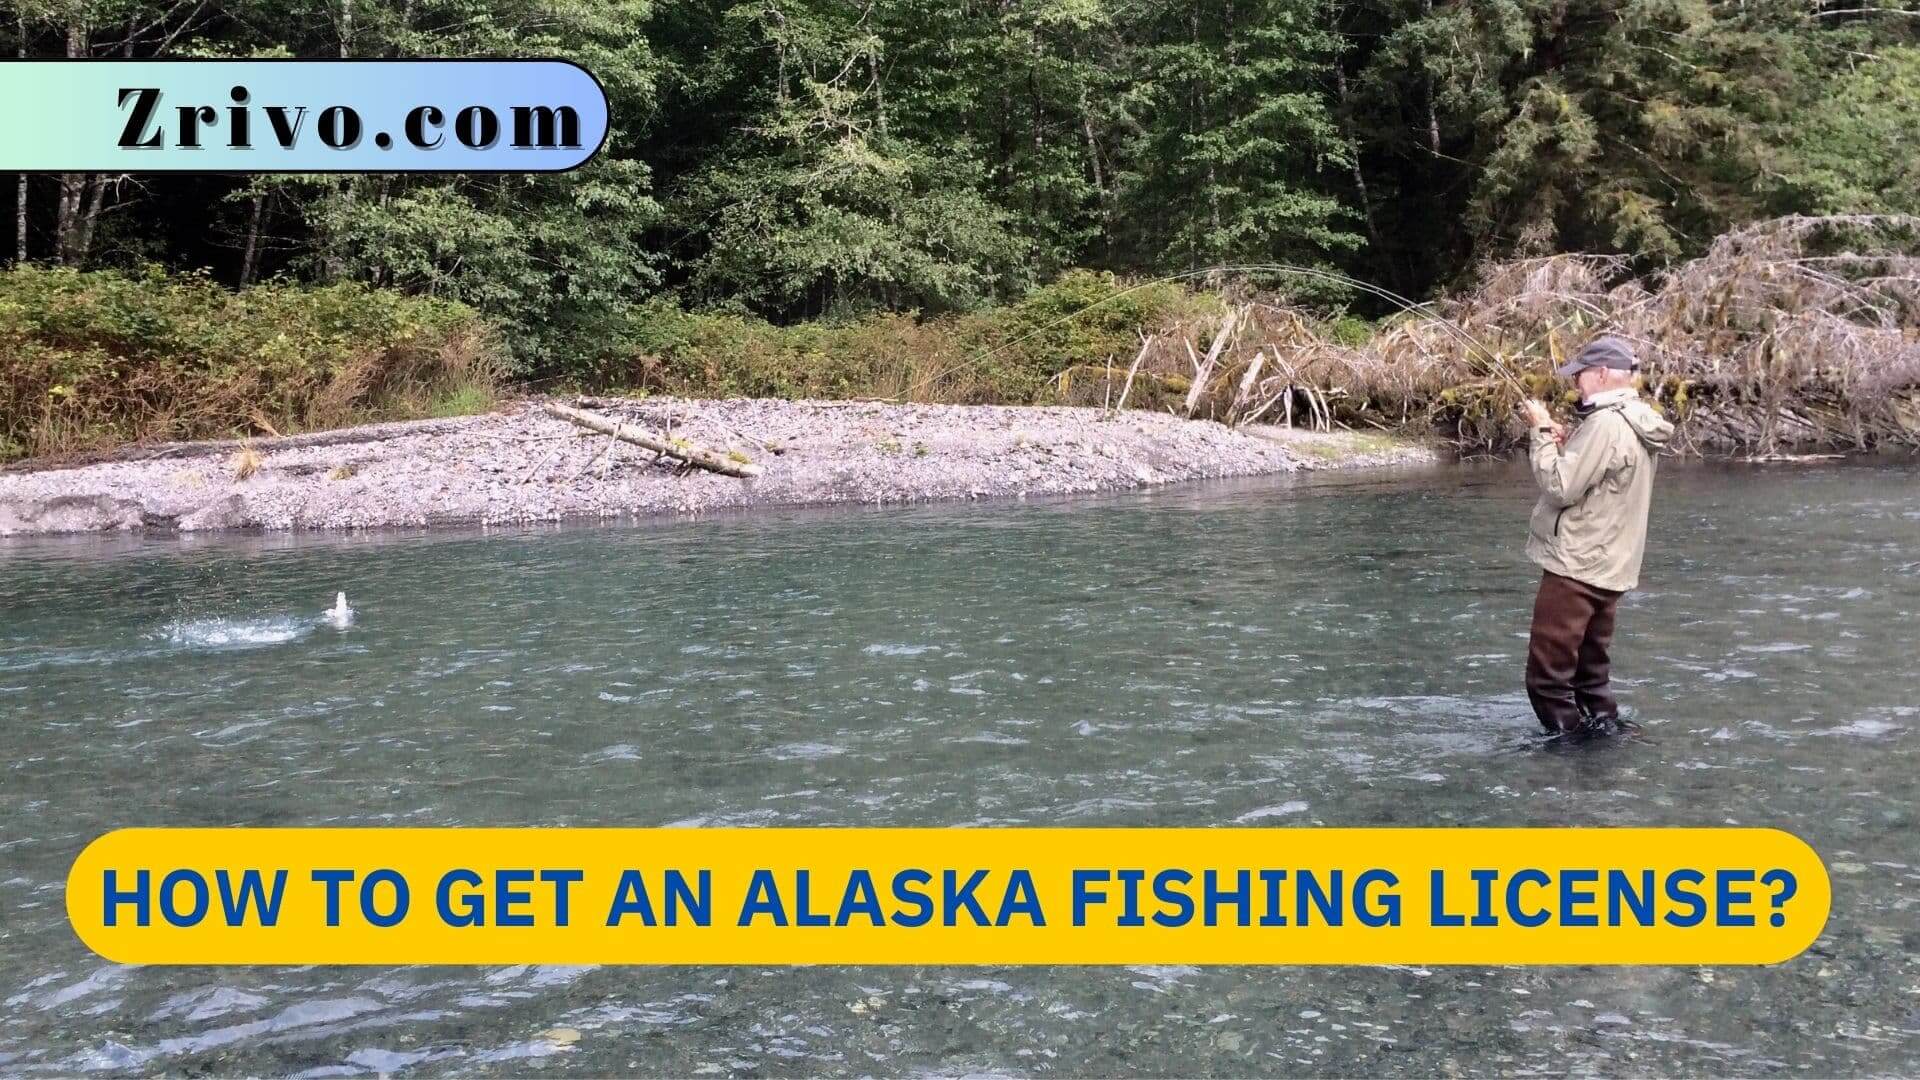 How to Get an Alaska Fishing License?